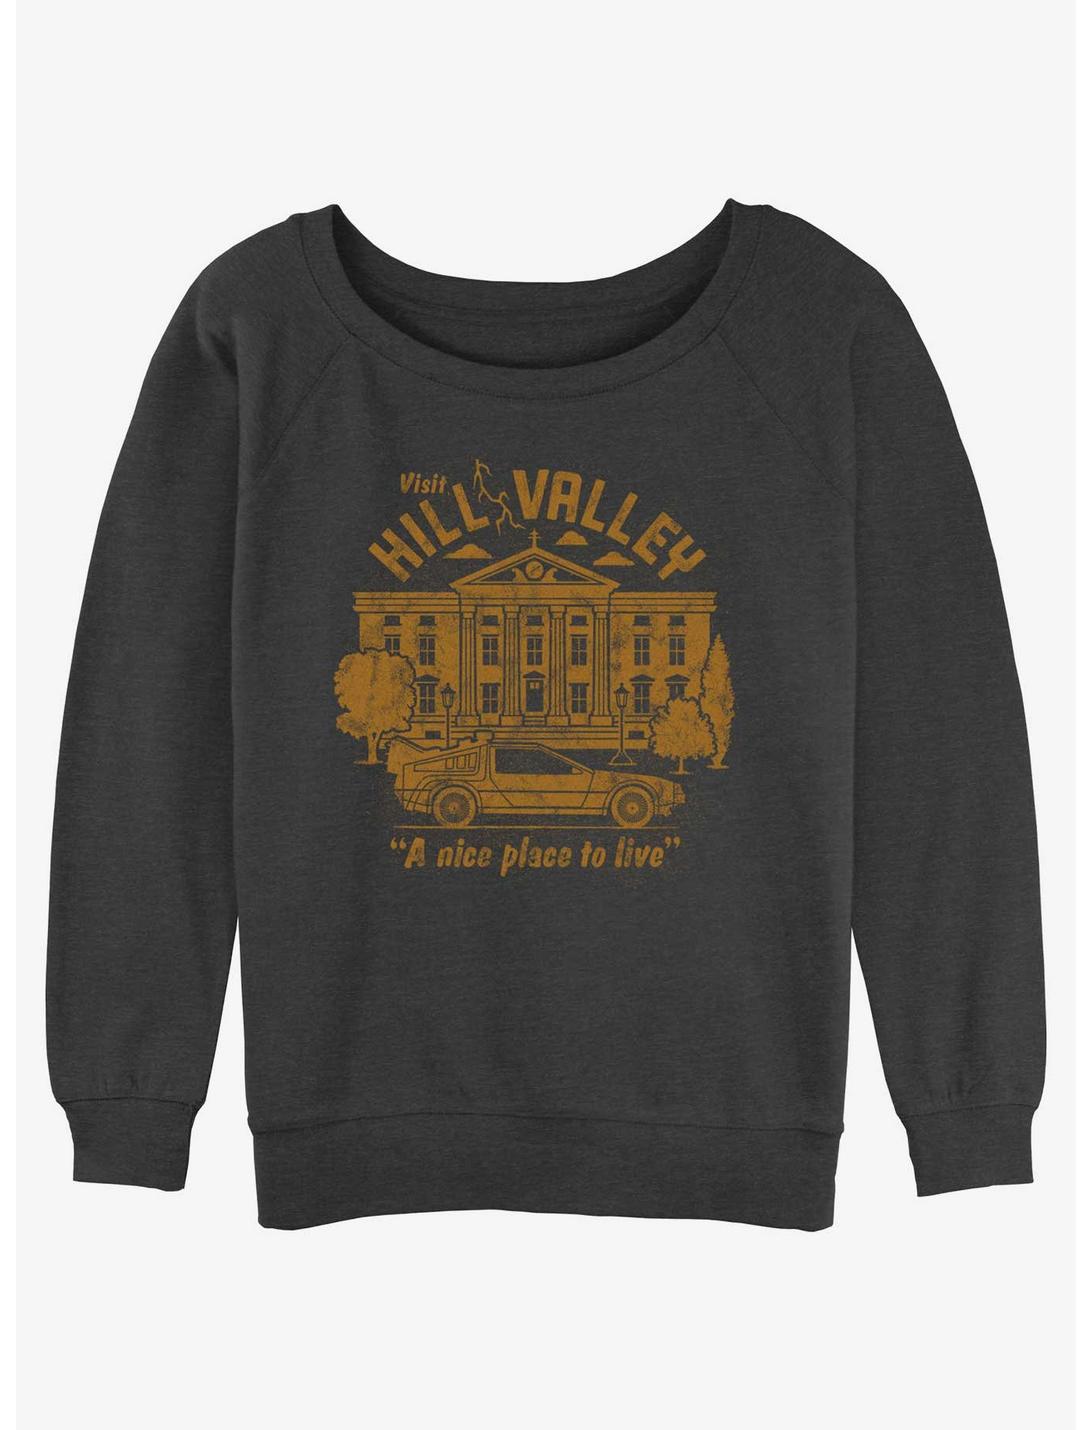 Back to the Future Visit Hill Valley Girls Slouchy Sweatshirt, CHAR HTR, hi-res